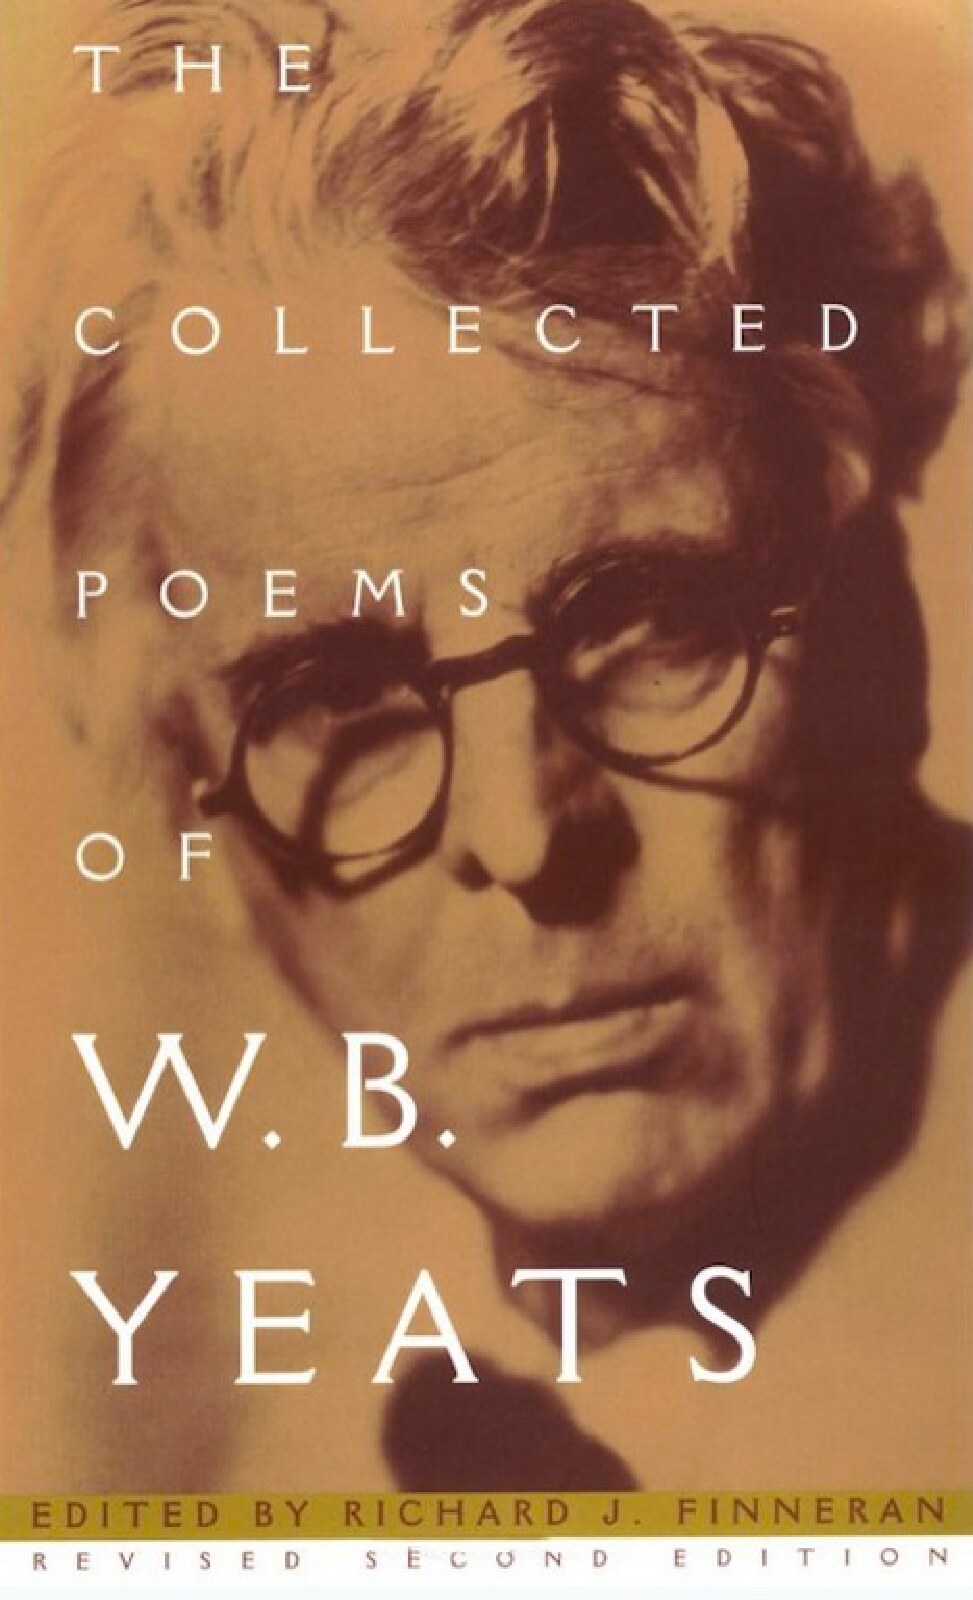 The Collected Poems of W. B. Yeats (revised second edition)